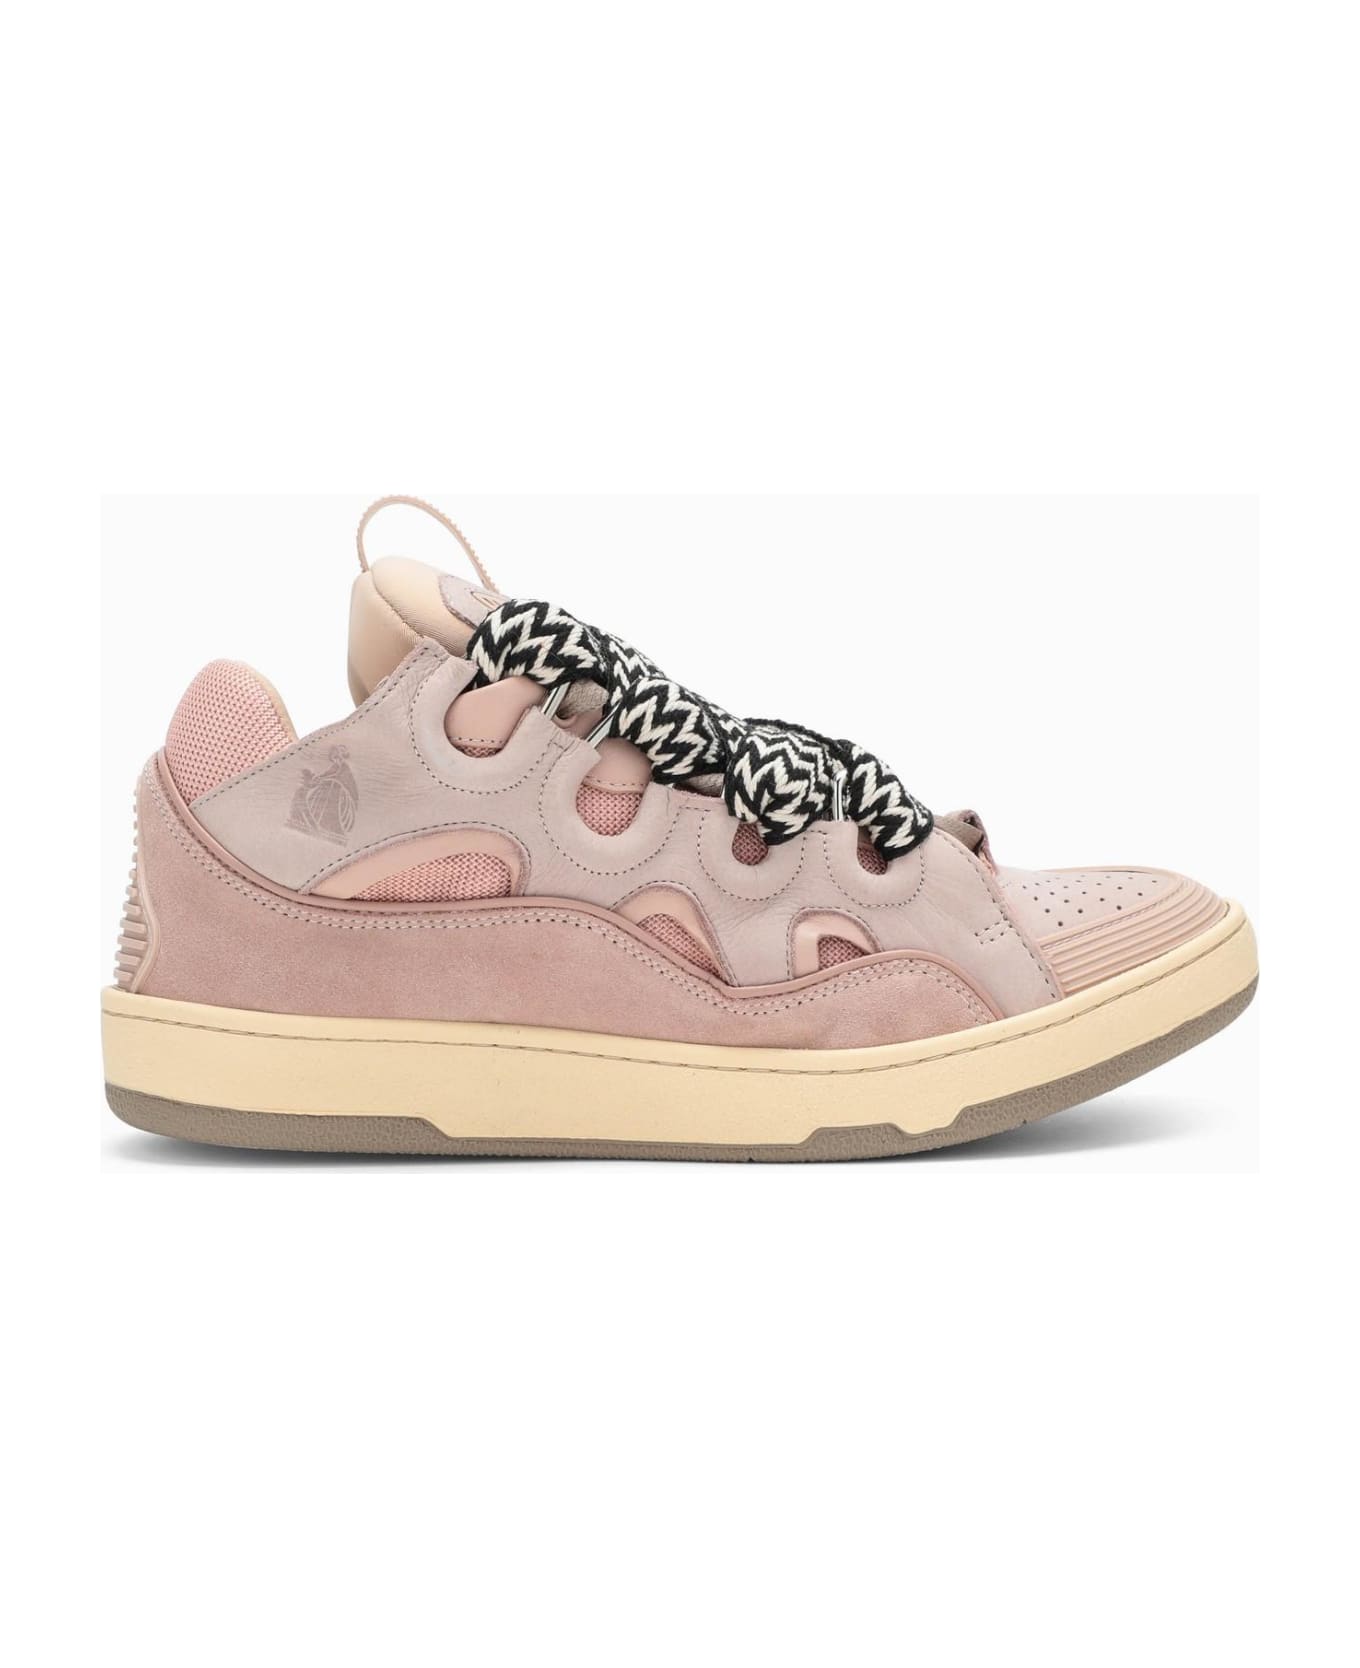 Lanvin Pink Leather Curb Sneakers - Pink スニーカー